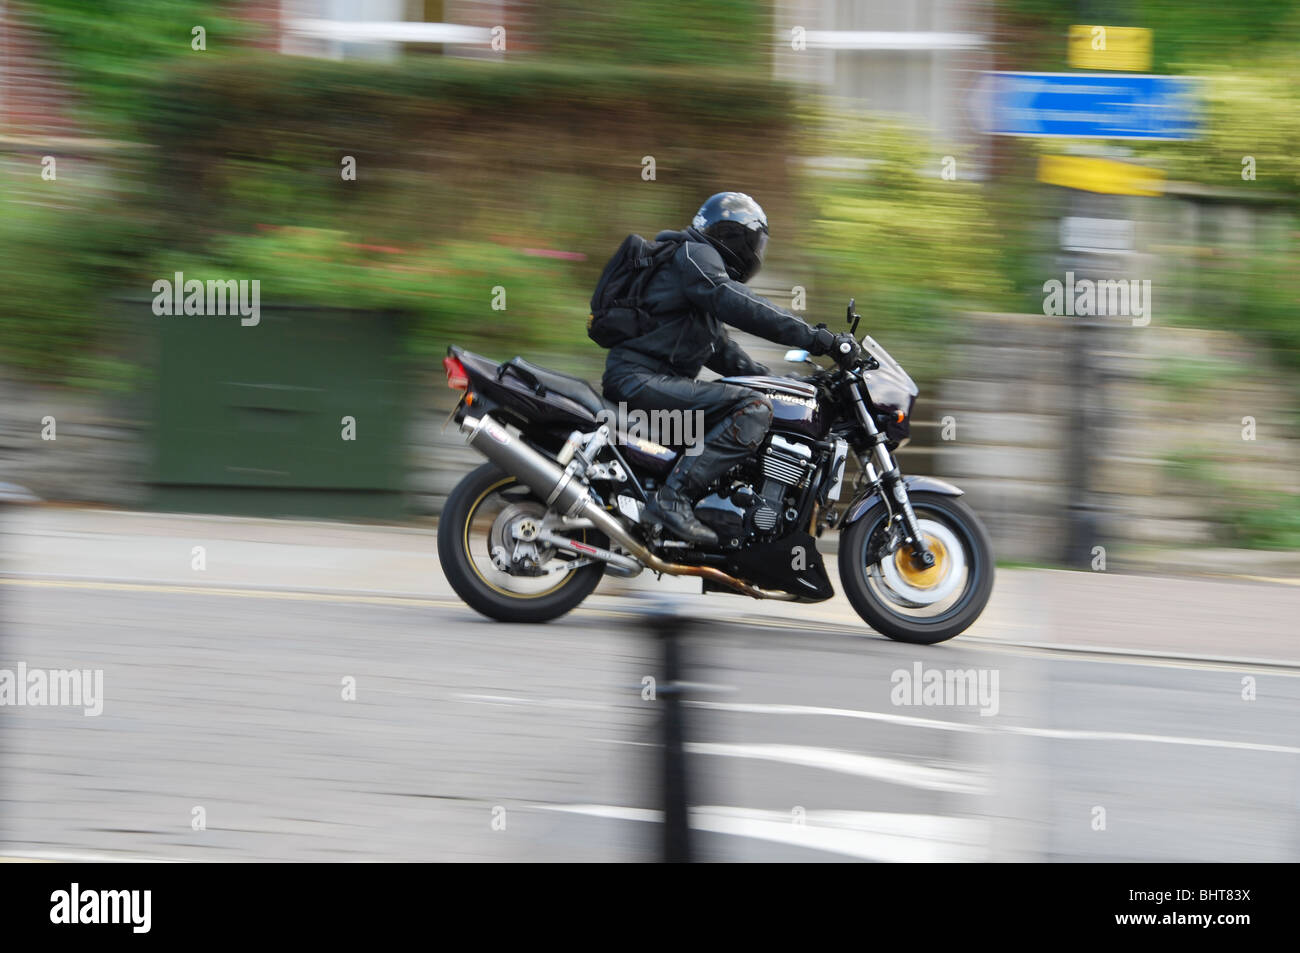 motorcycle passing Stock Photo